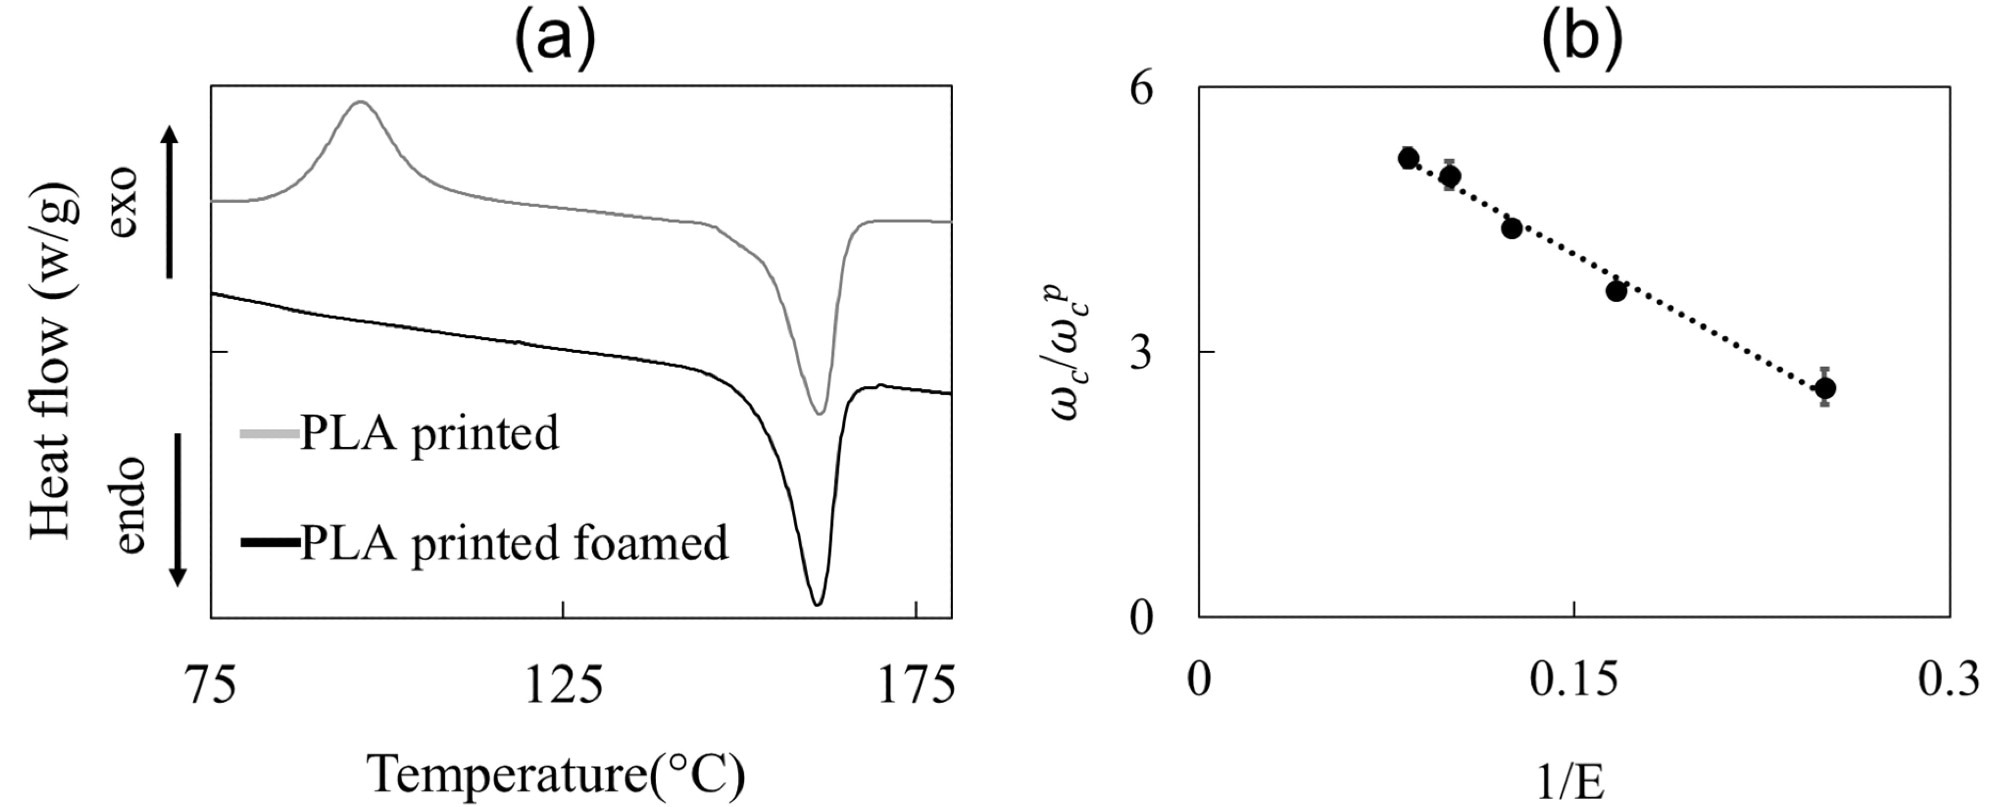 (a) DSC curves for a printed and foamed/printed PLA strand; (b) effect of expansion ratio on the crystallinity content—the dashed line is a guide for the eye.